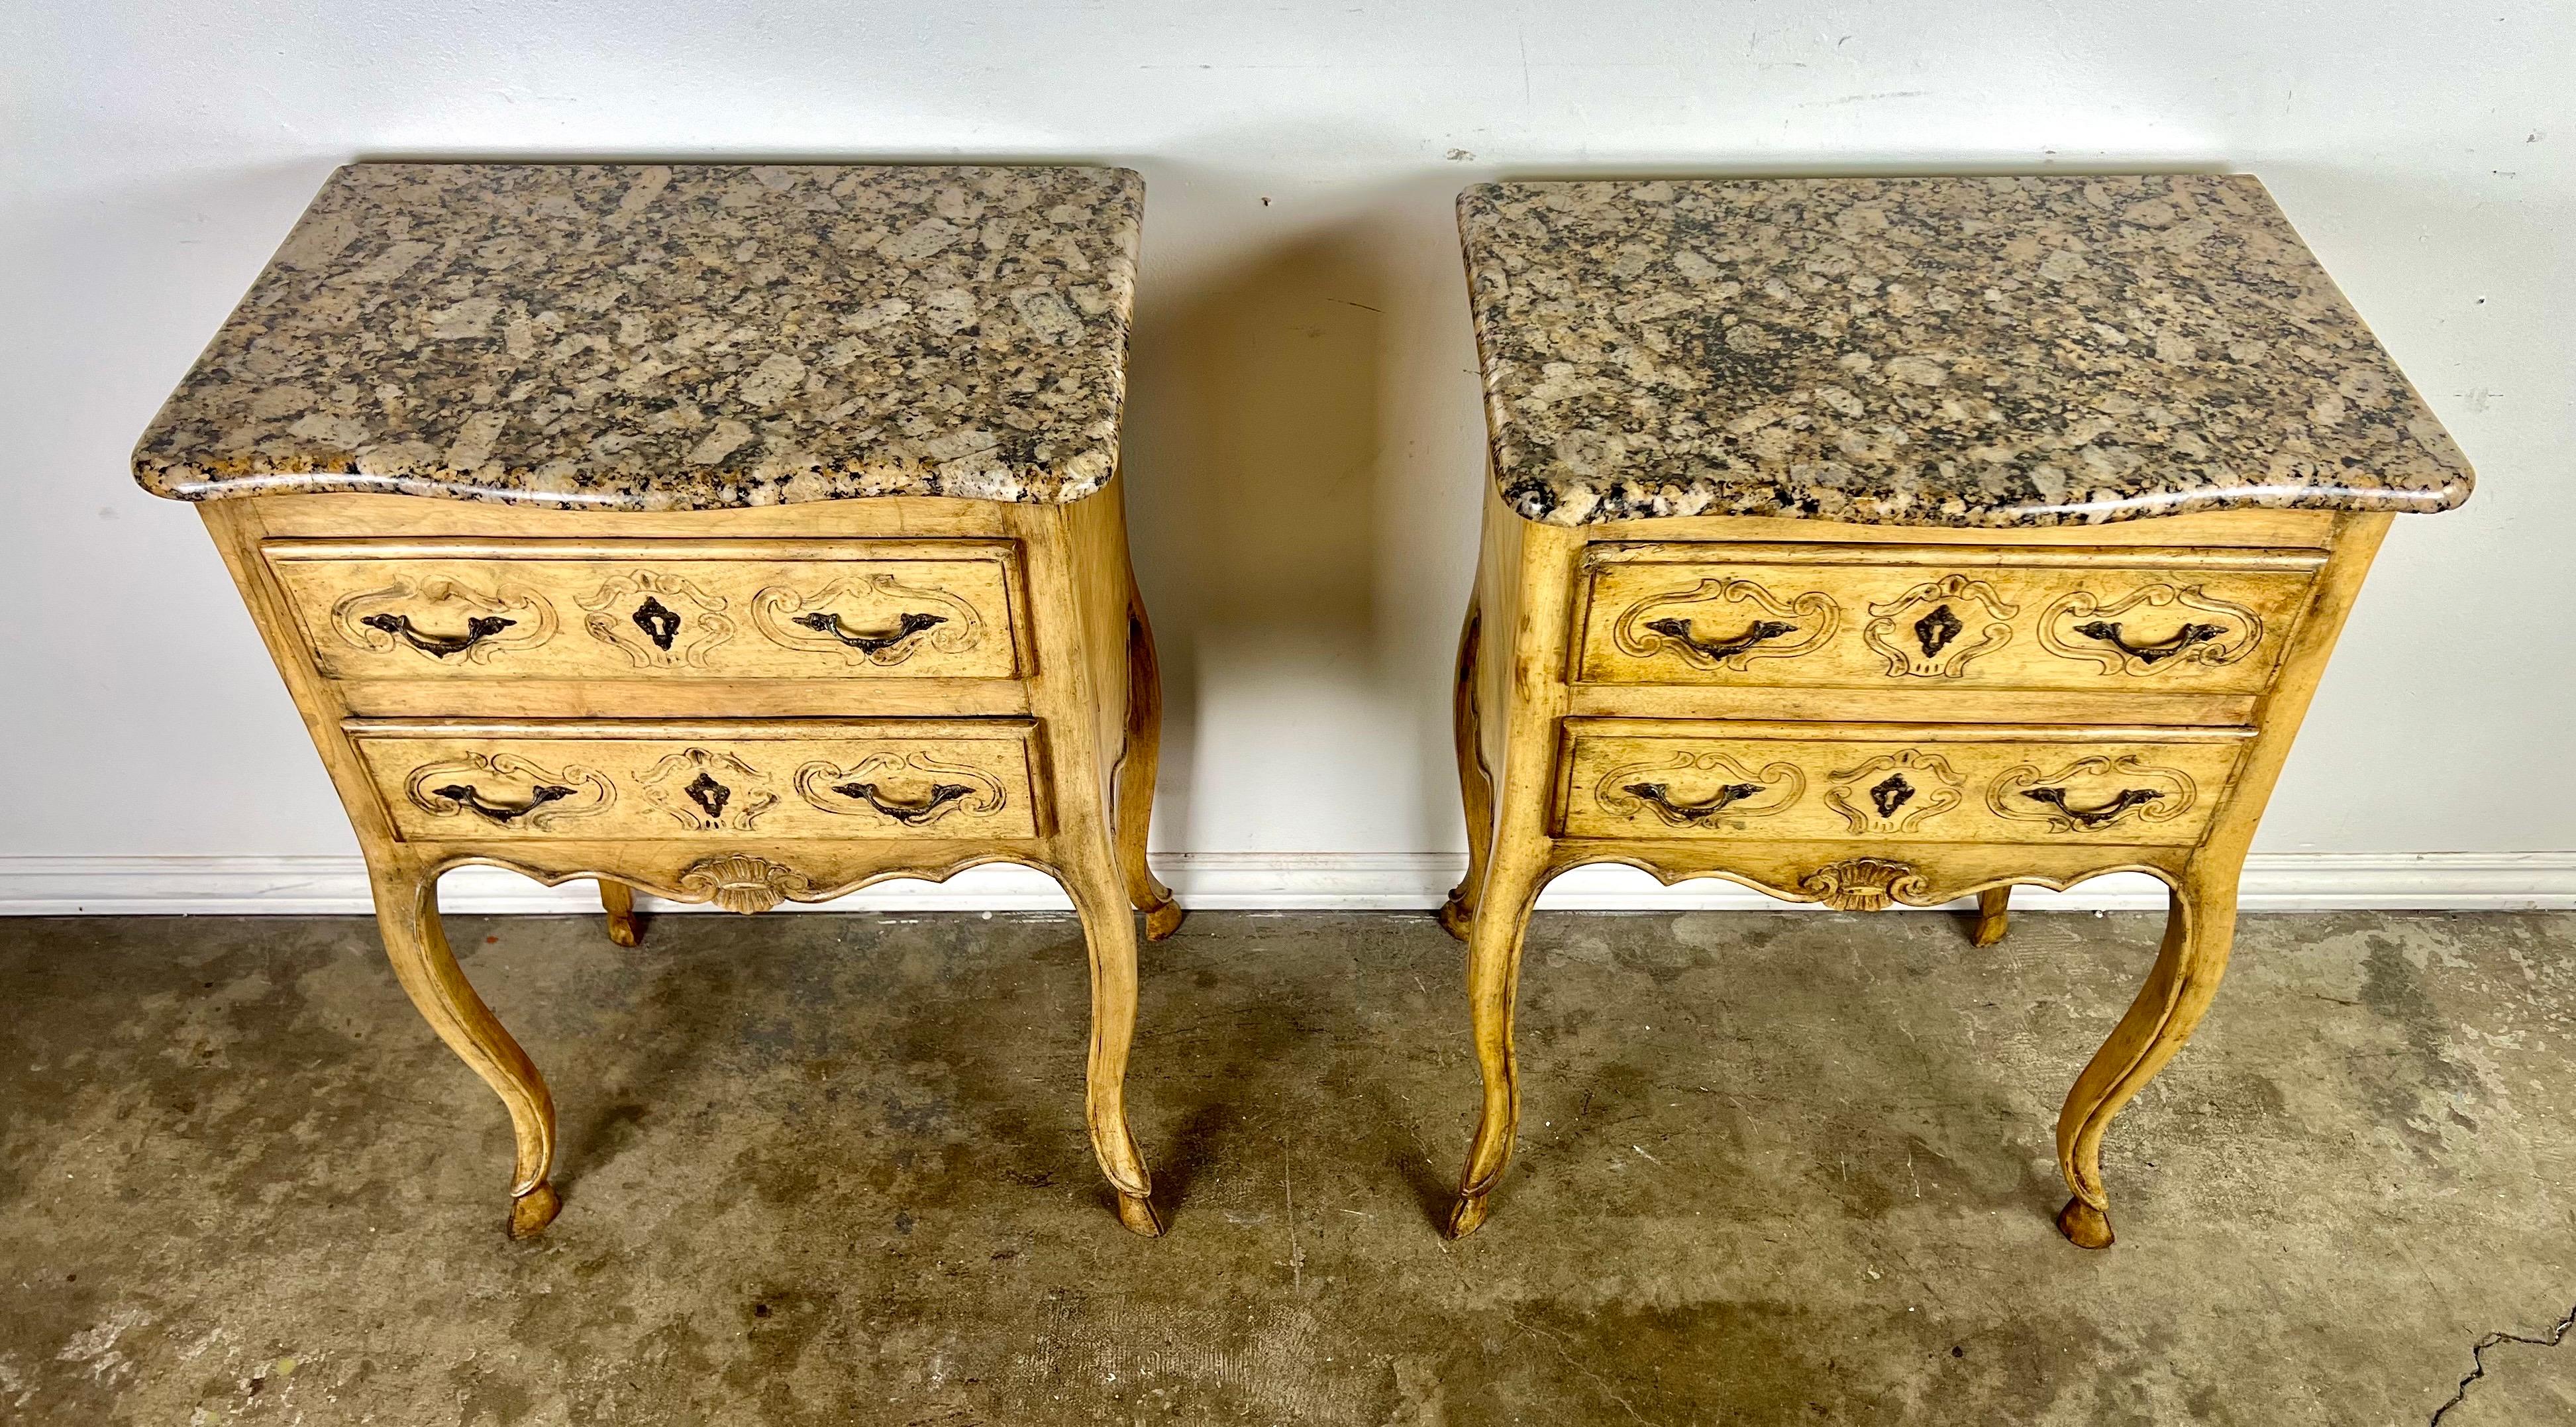 Pair of French Provincial painted side tables, each with two drawers and brass hardware, standing on cabriole legs ending in hoofed feet.  The granite tops feature a blend of cream, black, and touches of brown, beautifully complementing the tables'